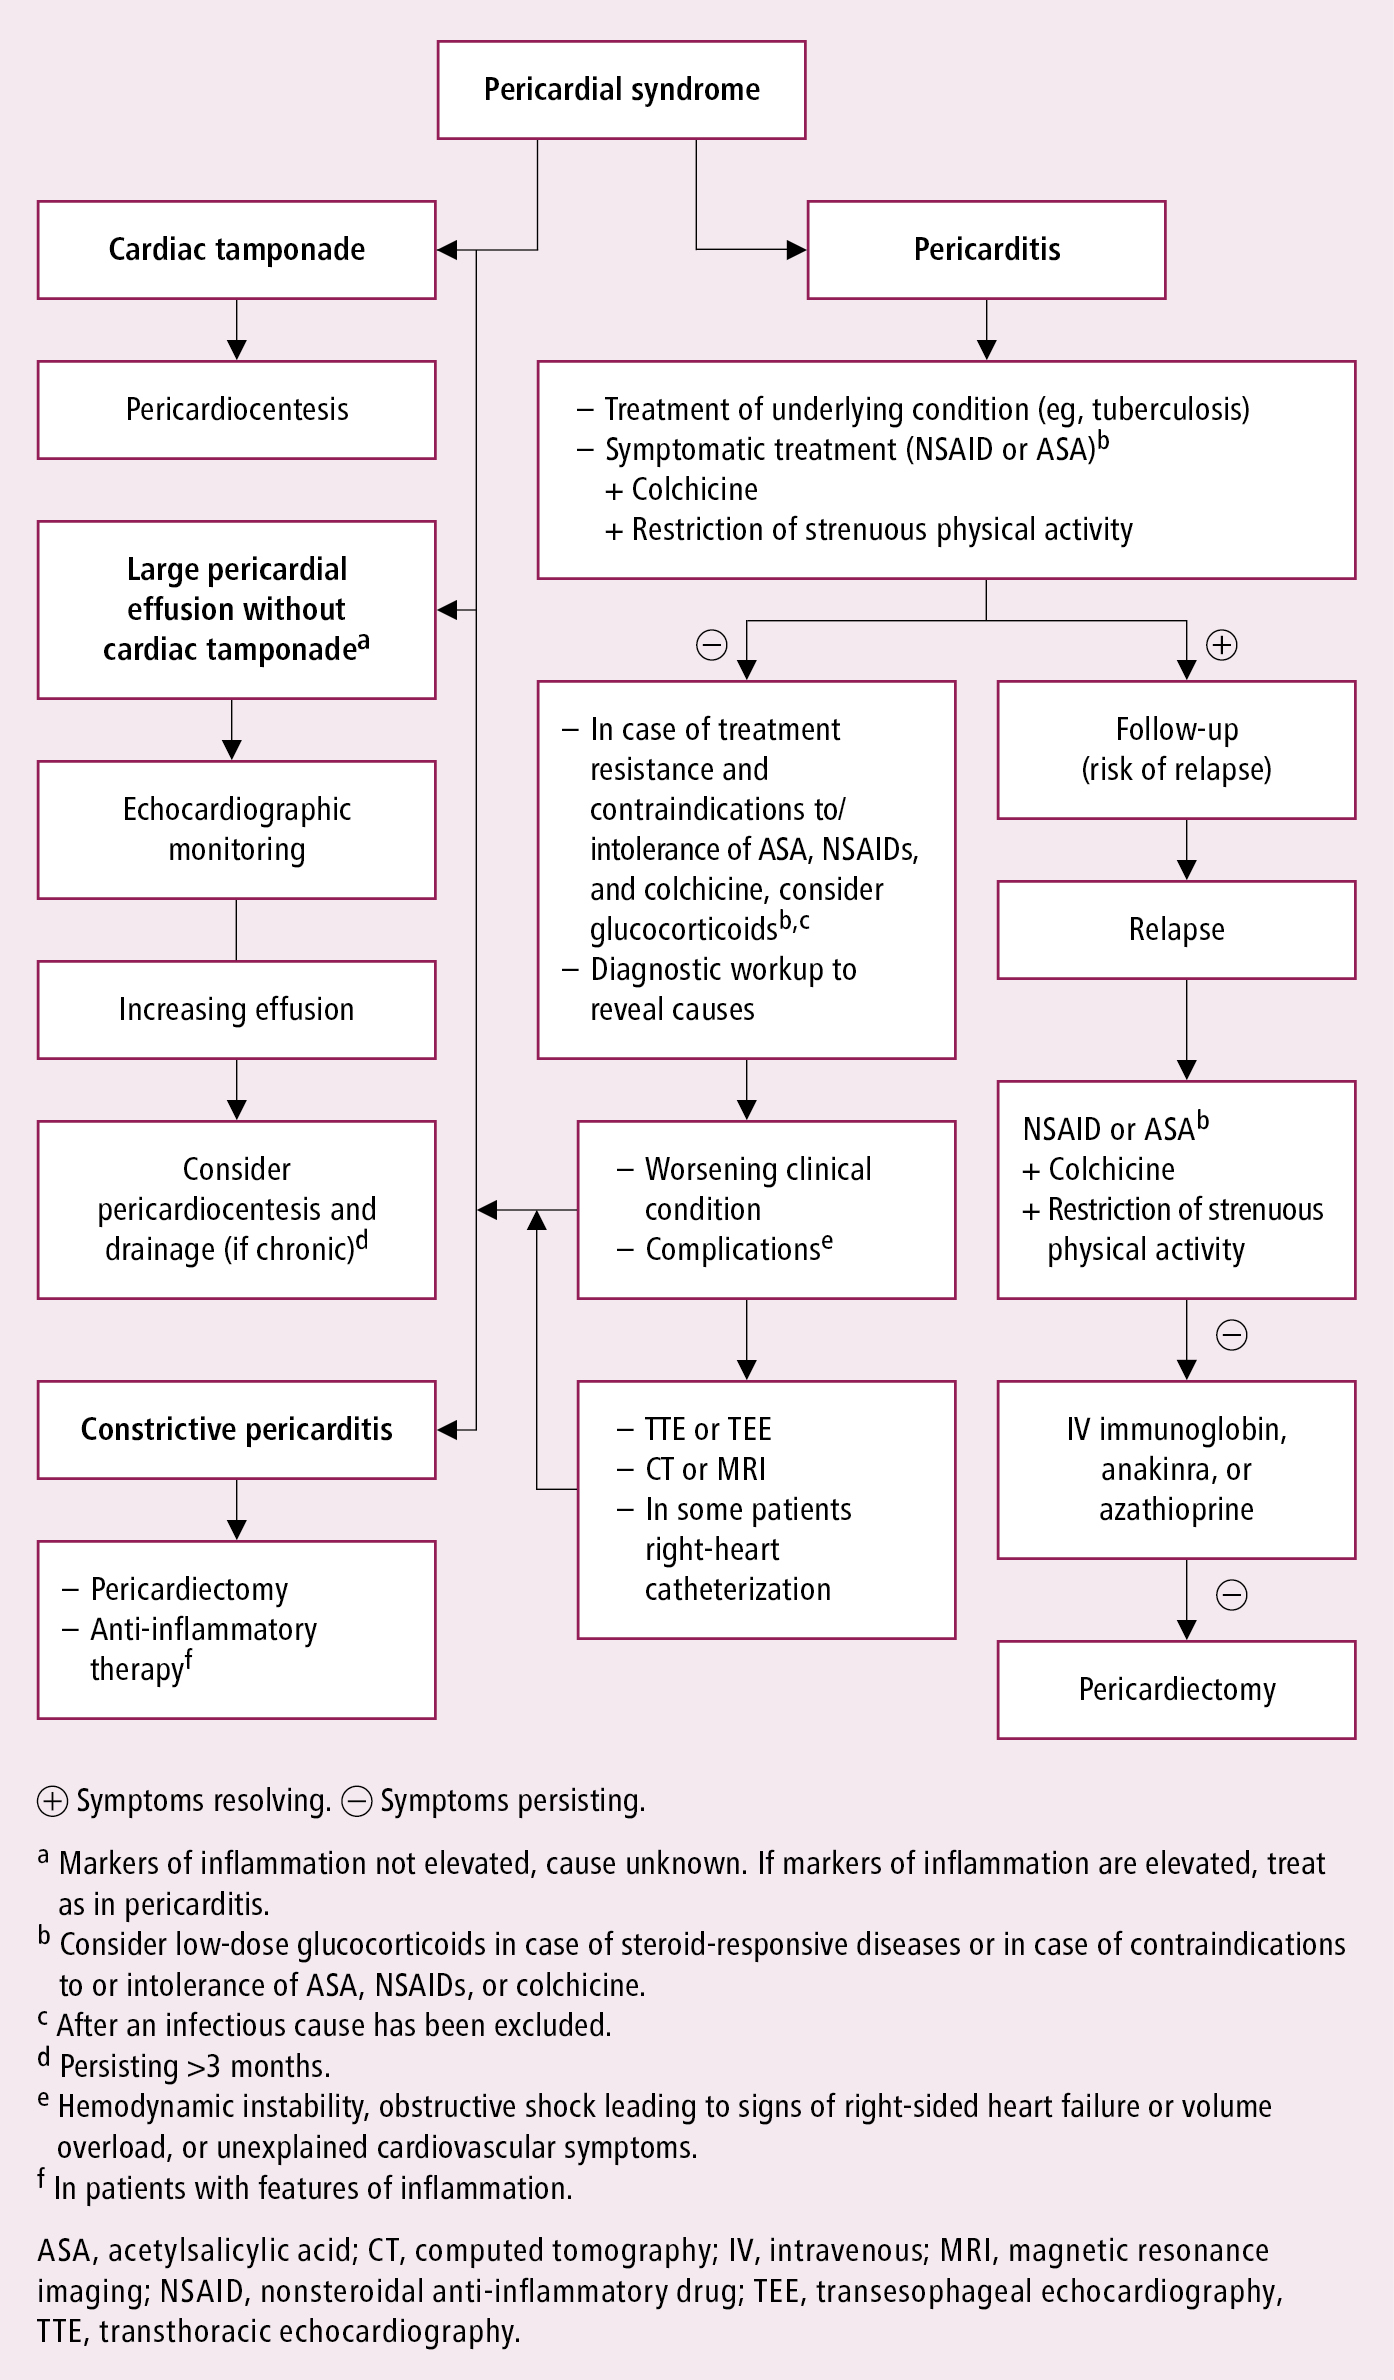 Figure 031_0616.  Management algorithm in pericarditis.  Based on the 2015 European Society of Cardiology guidelines.  